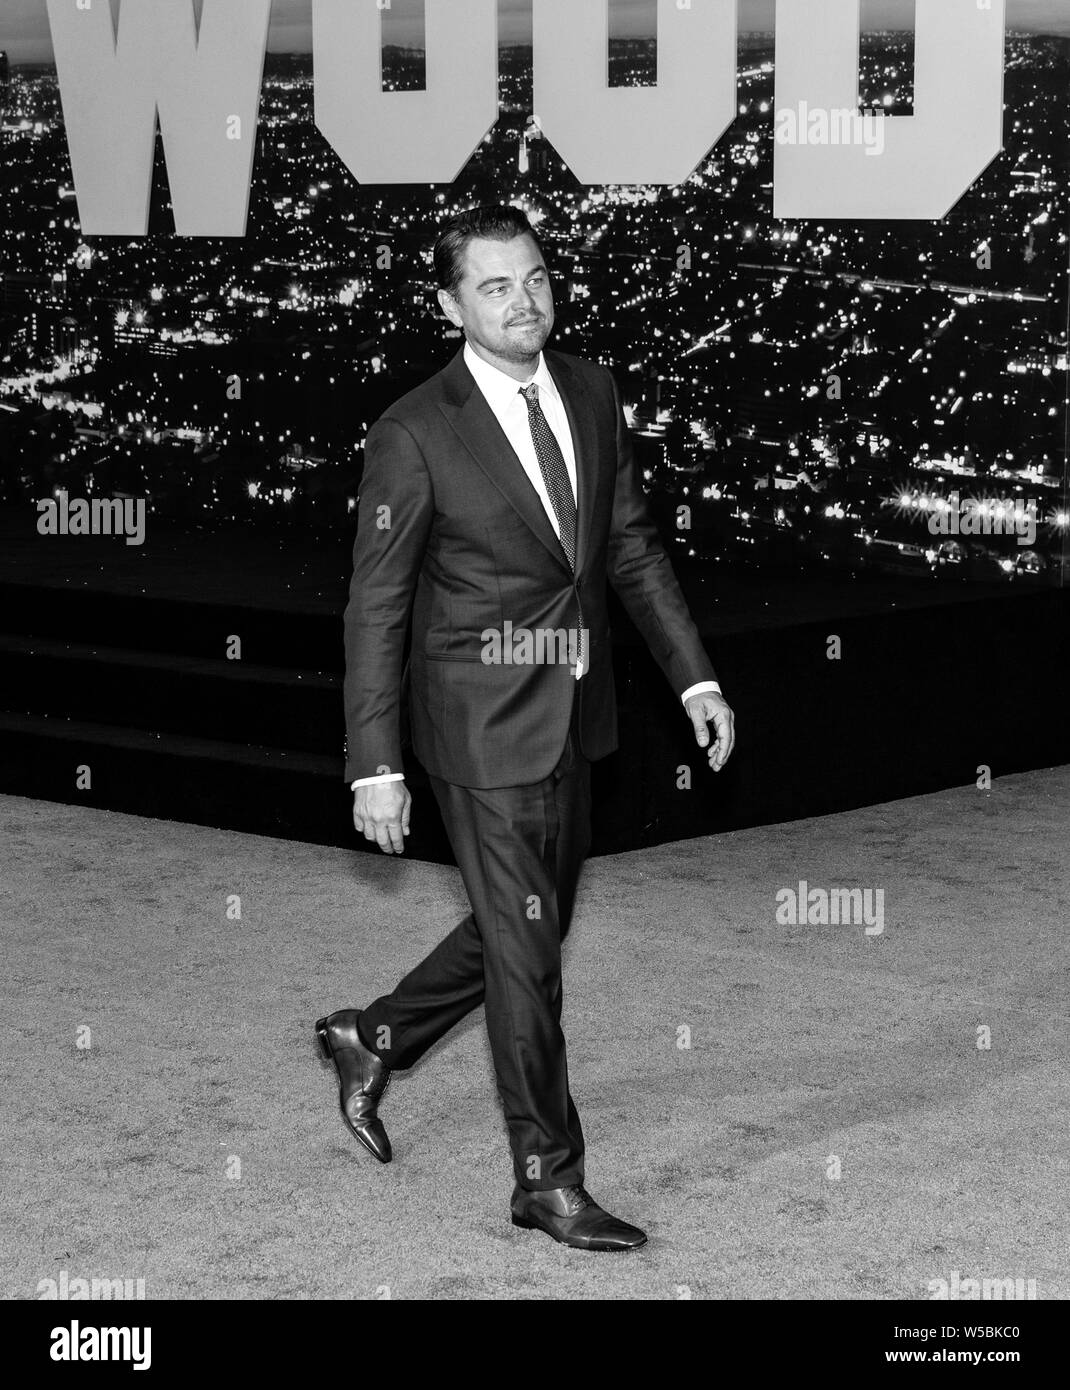 Los Angeles, CA - July 22, 2019: Leonardo DiCaprio attends The Los Angeles Premiere Of  "Once Upon a Time in Hollywood" held at TCL Chinese Theatre Stock Photo